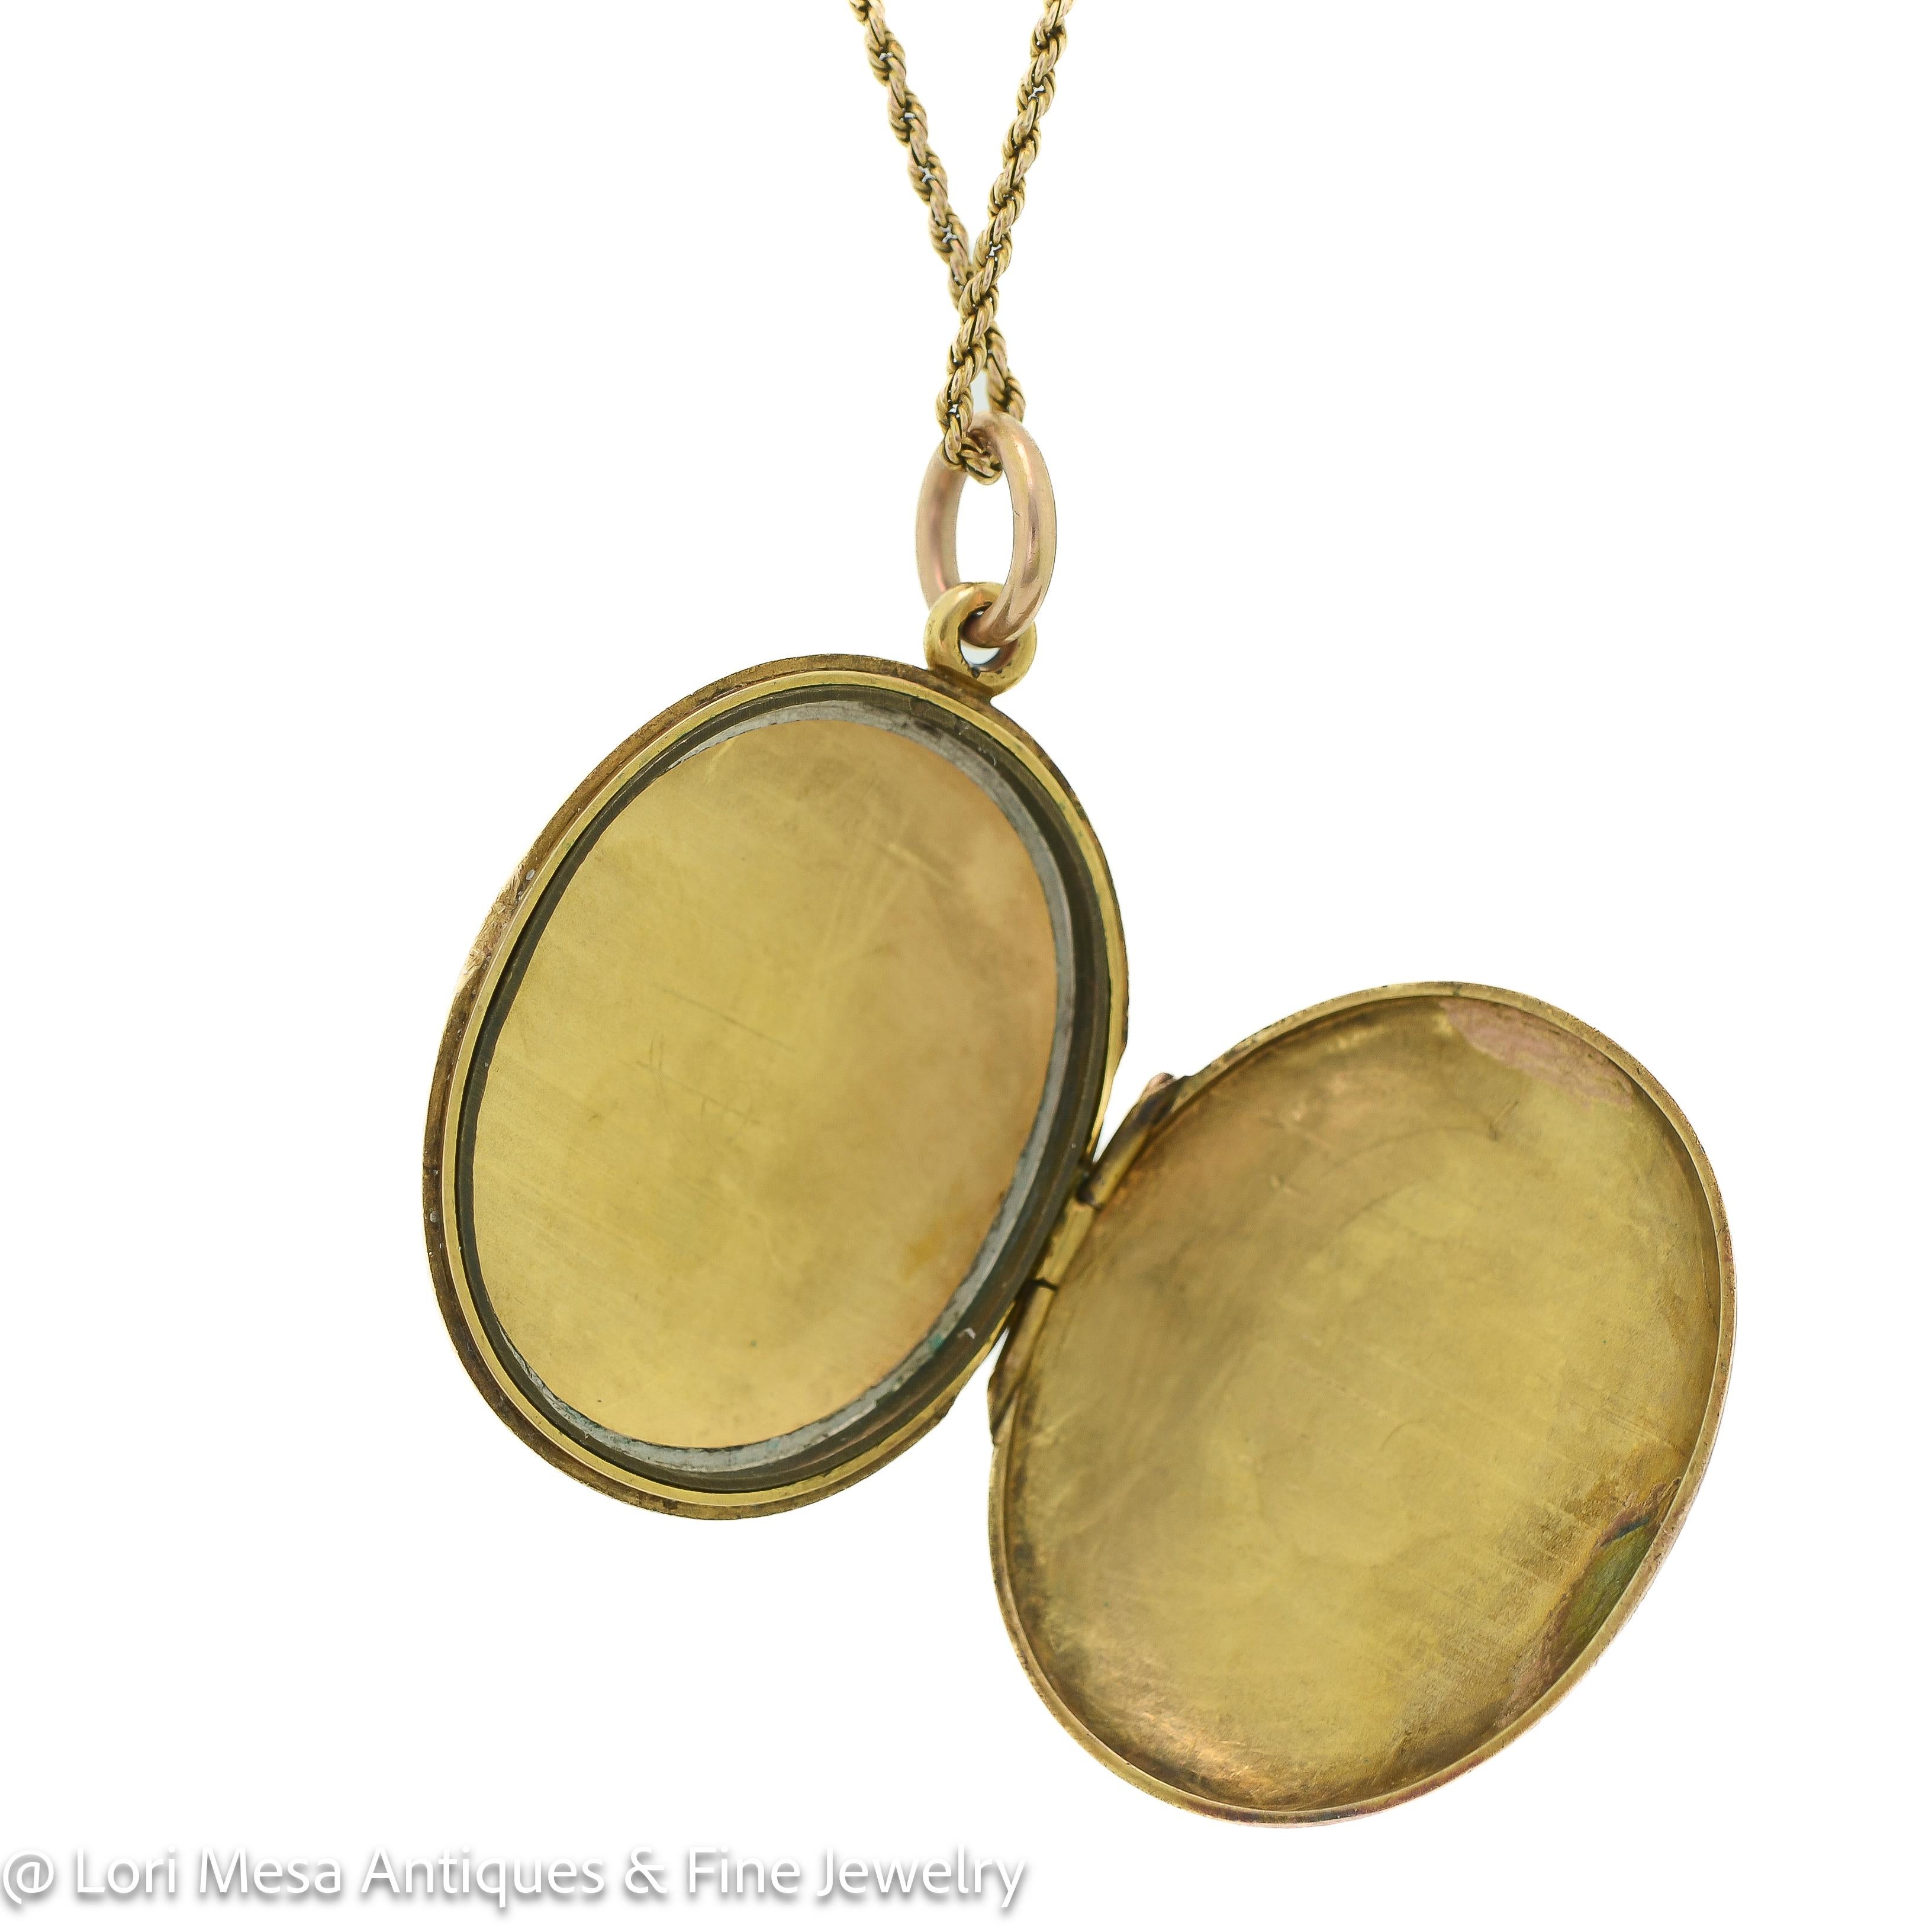 This exquisite Victorian locket is a true masterpiece that dates back to 1870. It is crafted from high-quality yellow gold and has an oval shape that makes it look elegant and stylish. The locket's surface is heavily engraved on both sides,